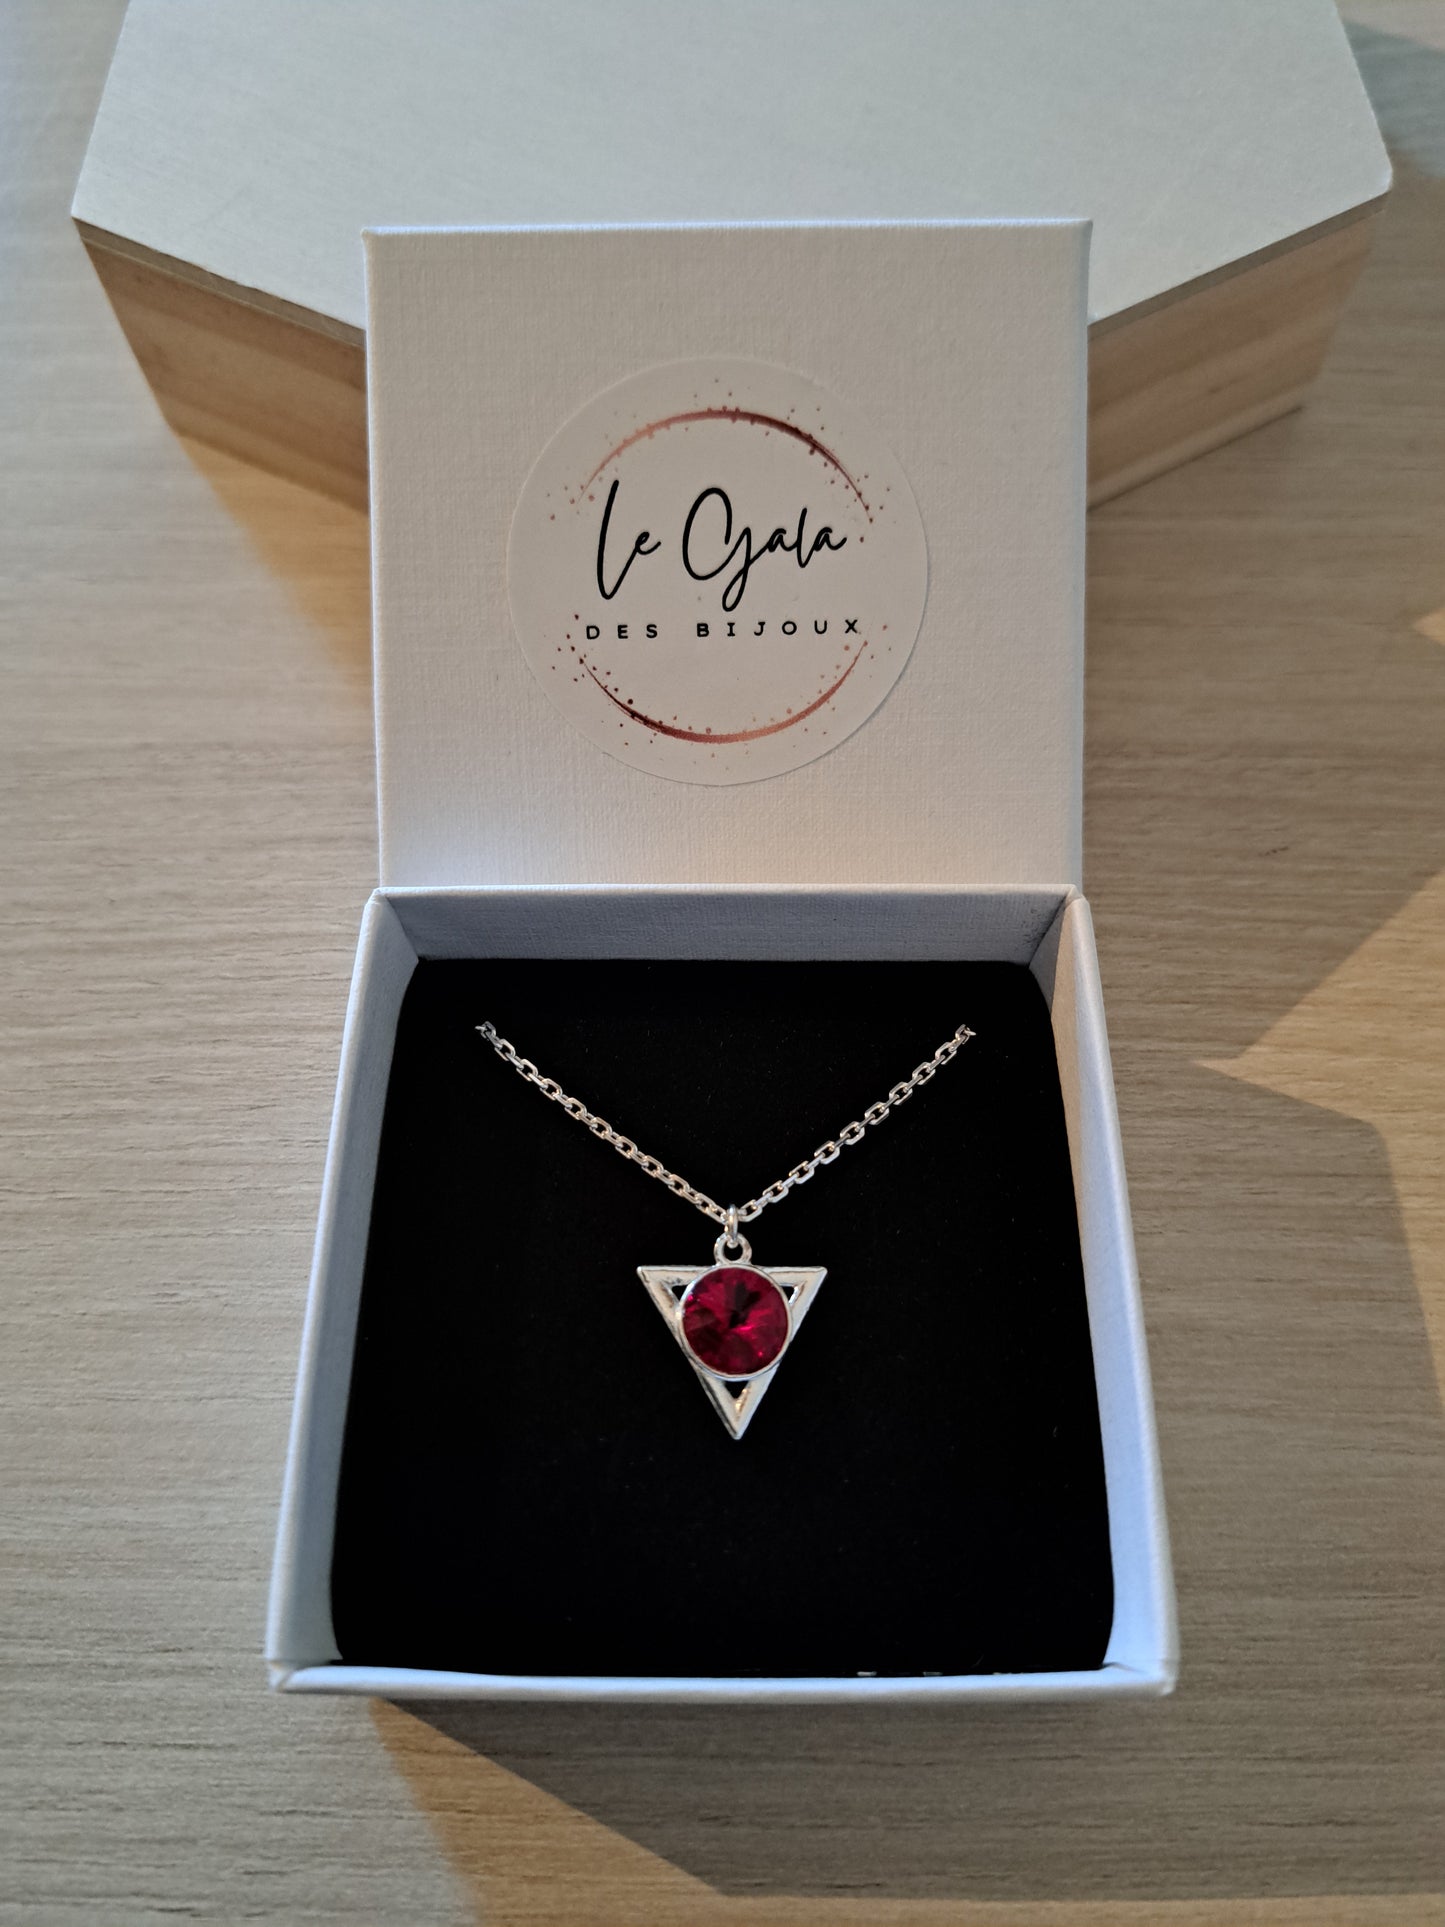 Collier triangle cristal rouge